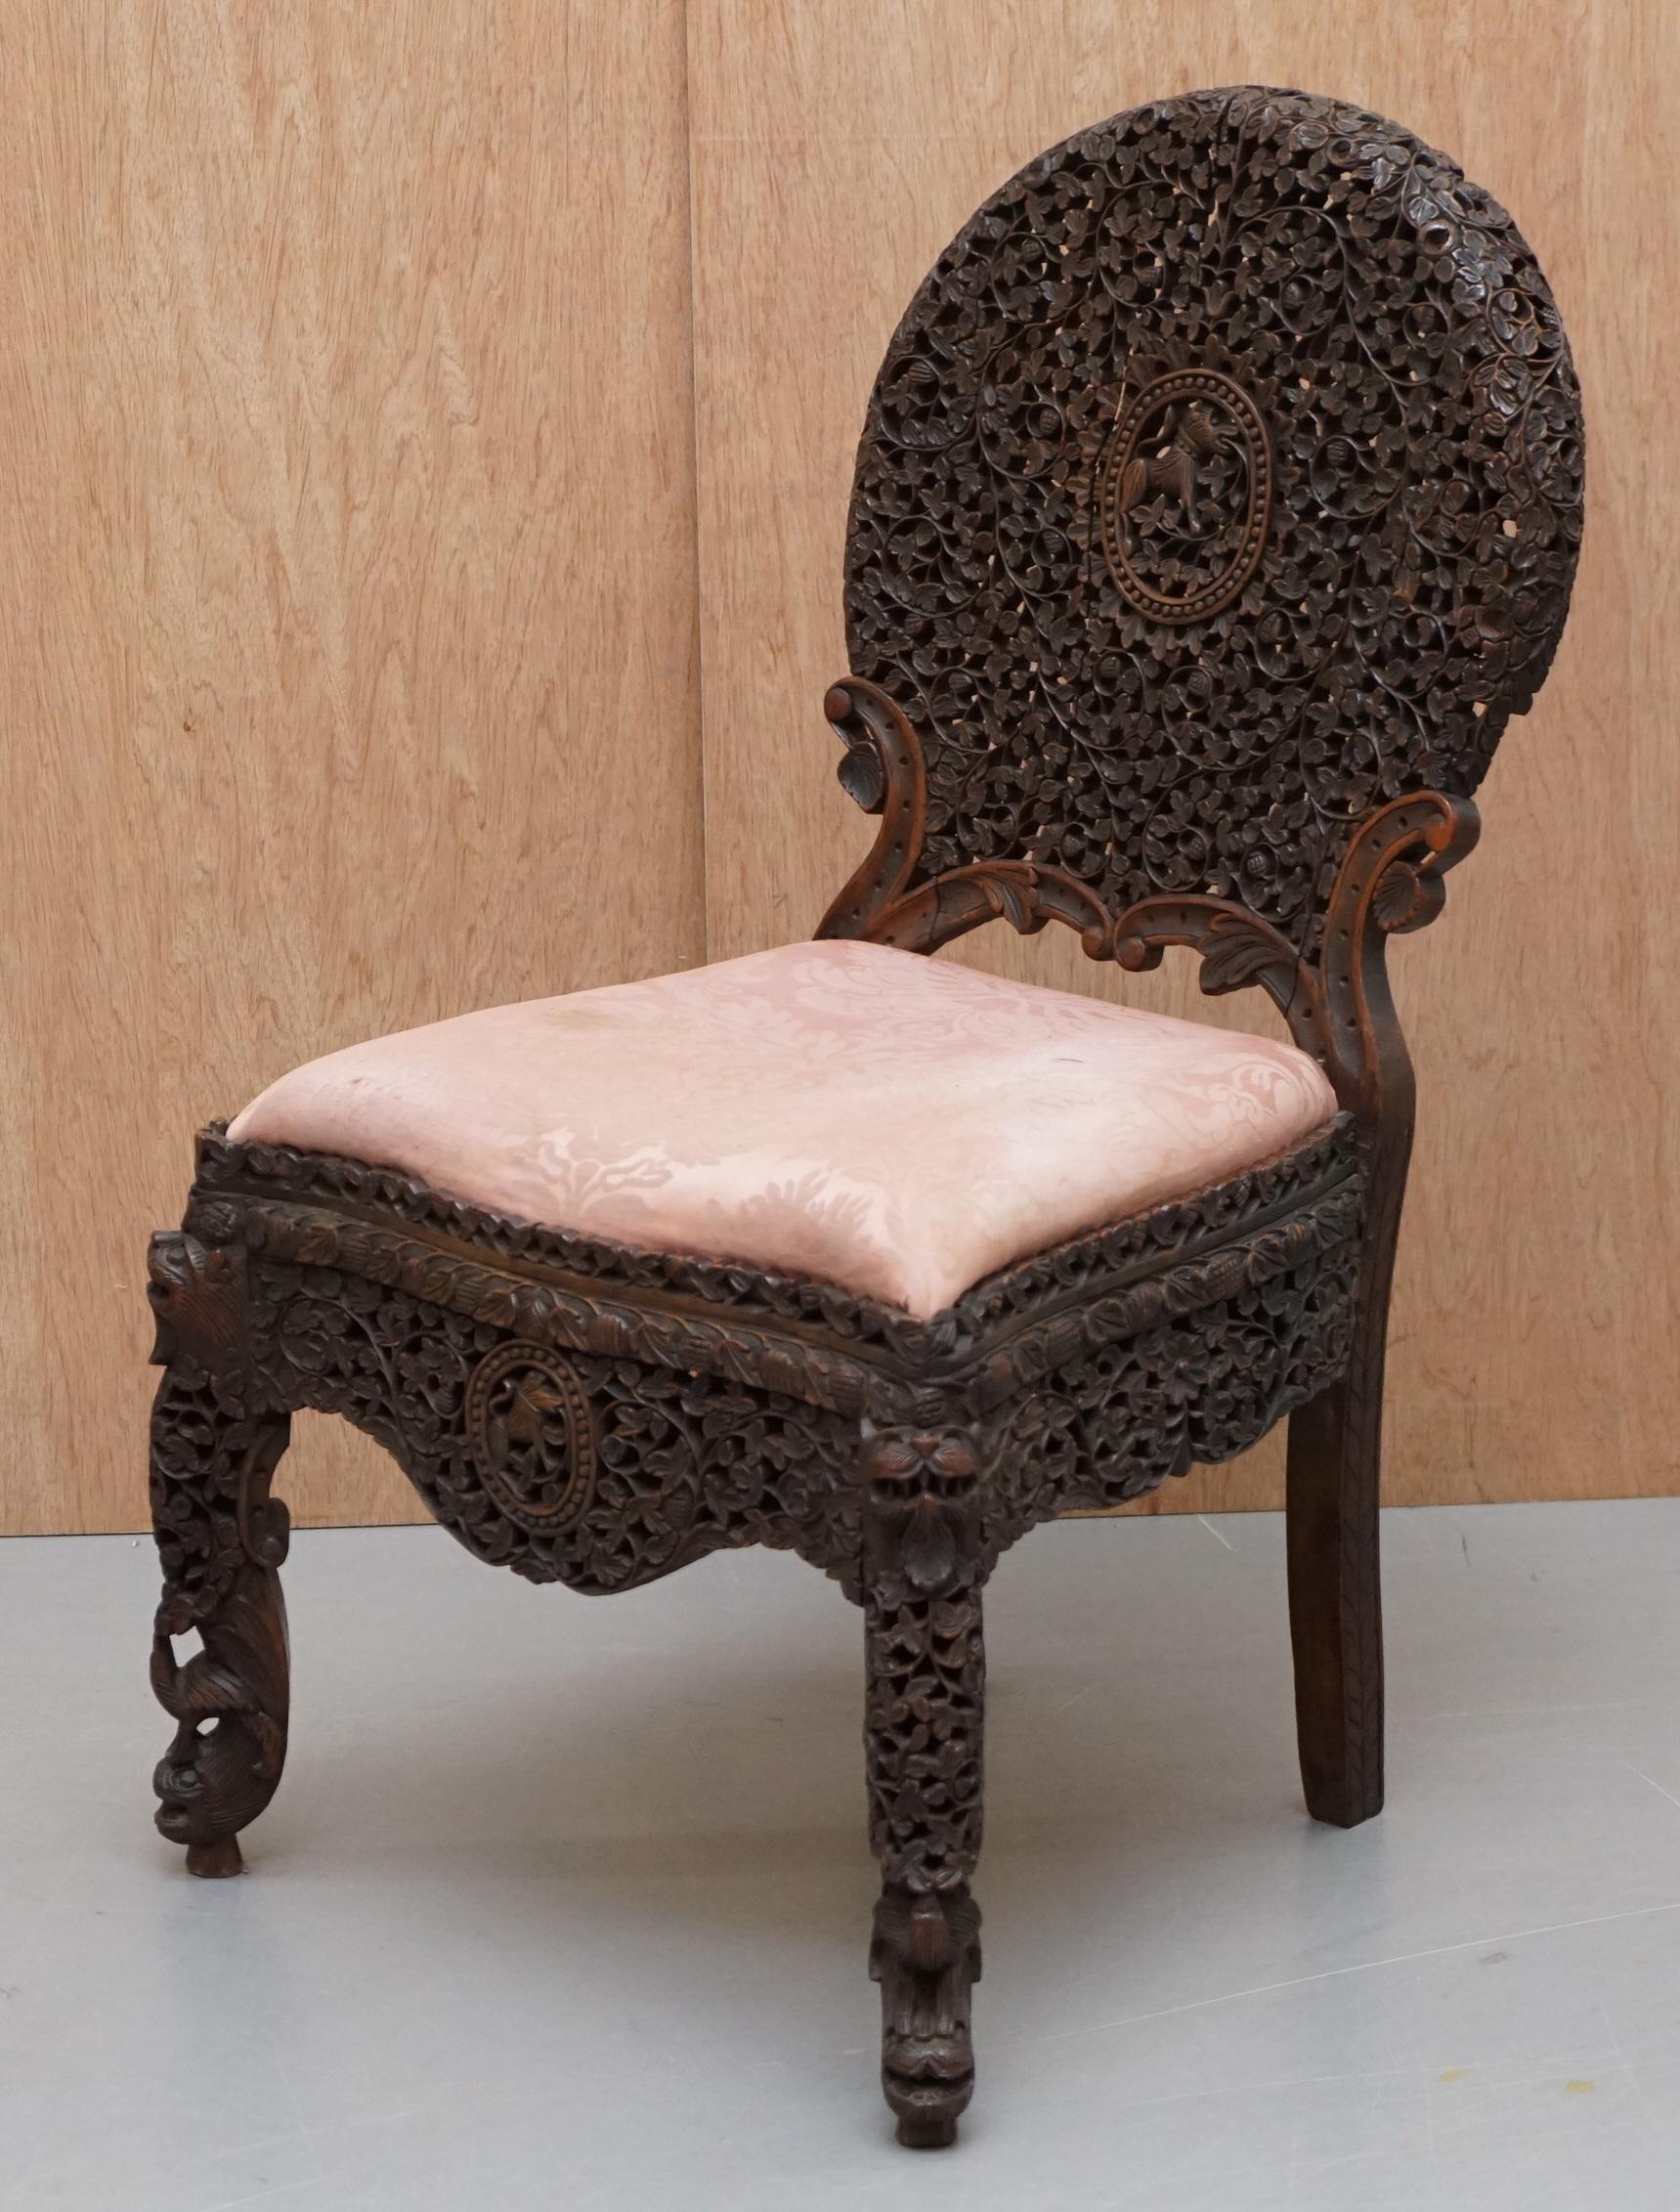 We are delighted to offer for sale this is for an original solid Hardwood Anglo-Indian Burmese hand carved chair

The condition is good, it has been restored to include having the frames checked, glued and clamped where required, there are no